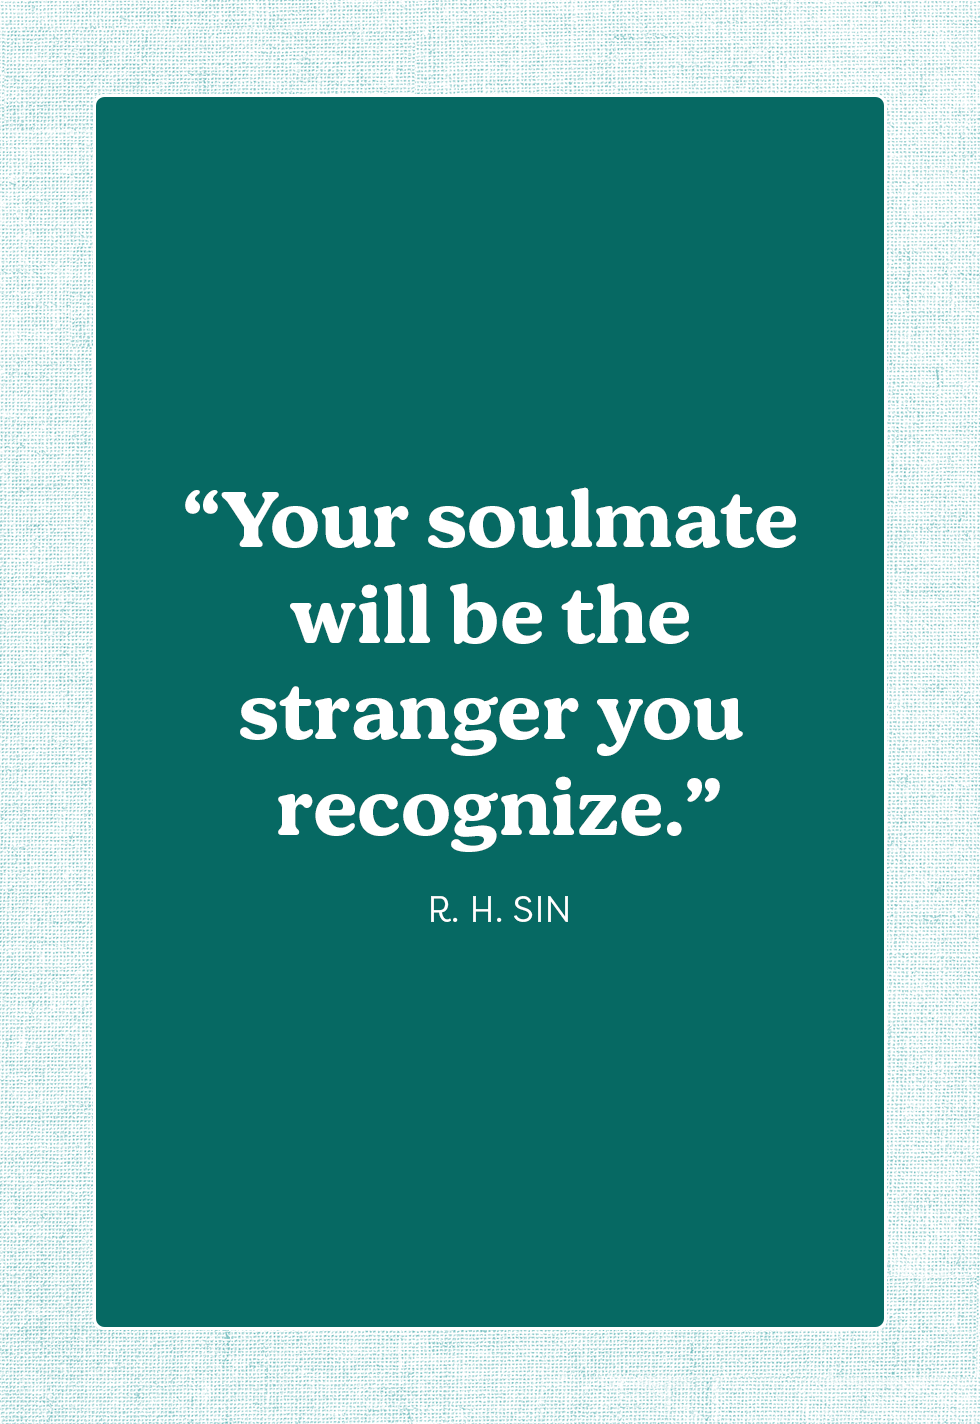 You Are My Soulmate Quotes: Your Soulmate Will Be The Stranger You Recognize